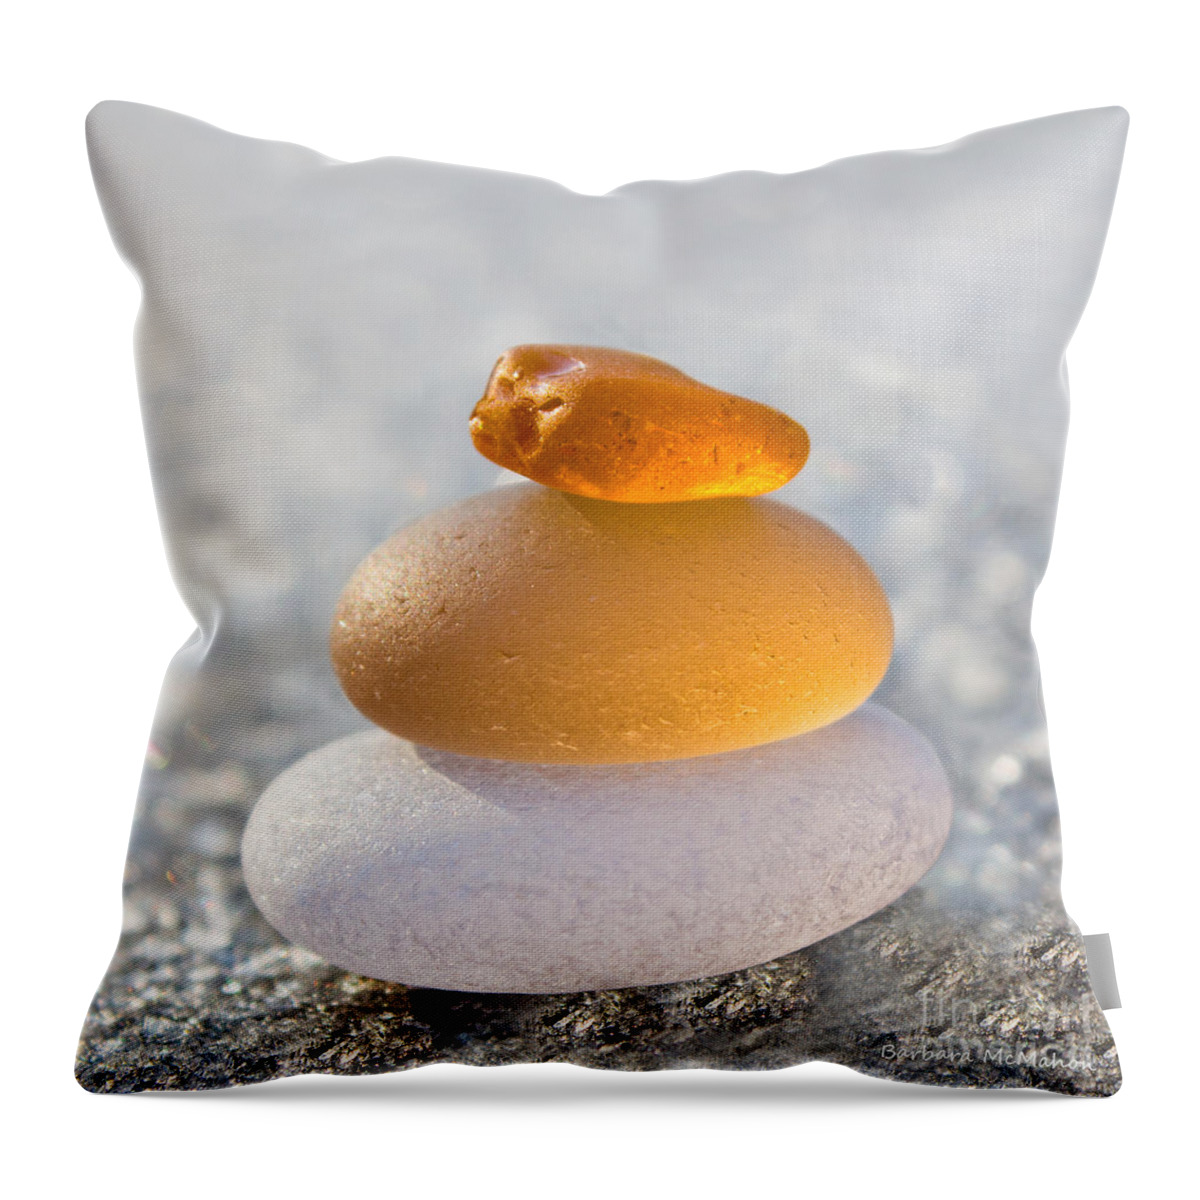 Glass Throw Pillow featuring the photograph The Golden Egg by Barbara McMahon